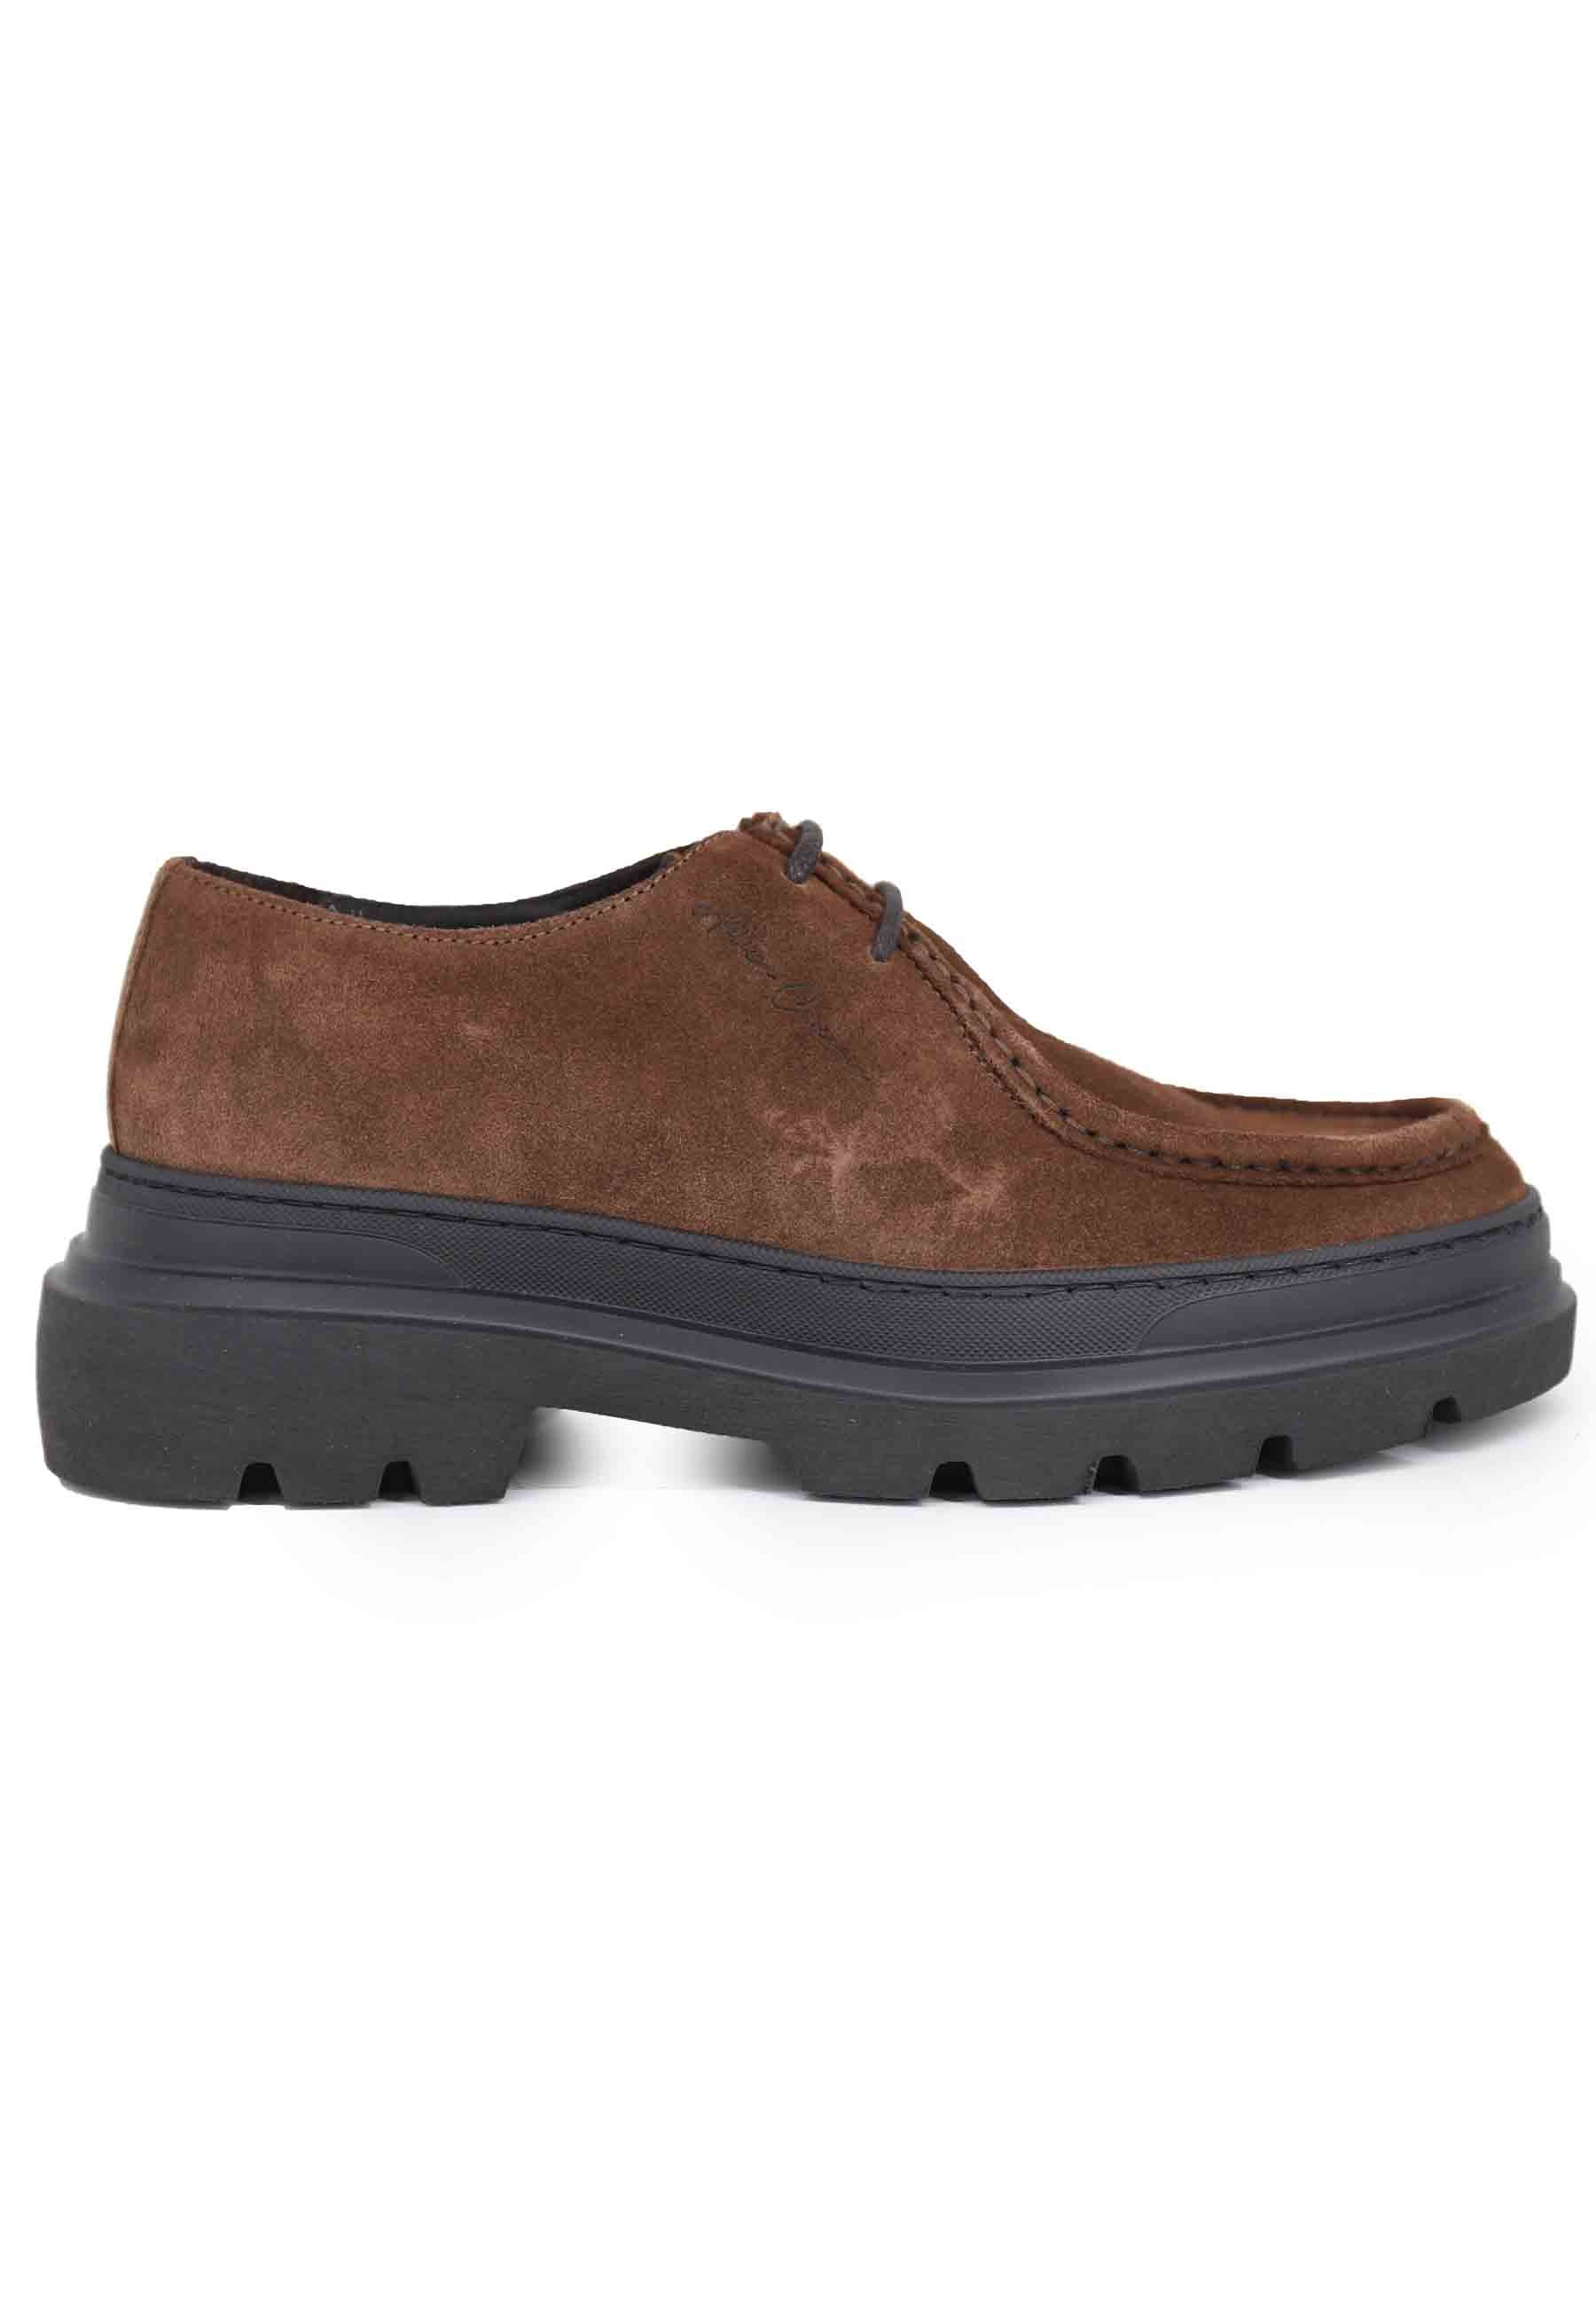 Men's lace-ups in brown suede with stitched tray and lug sole